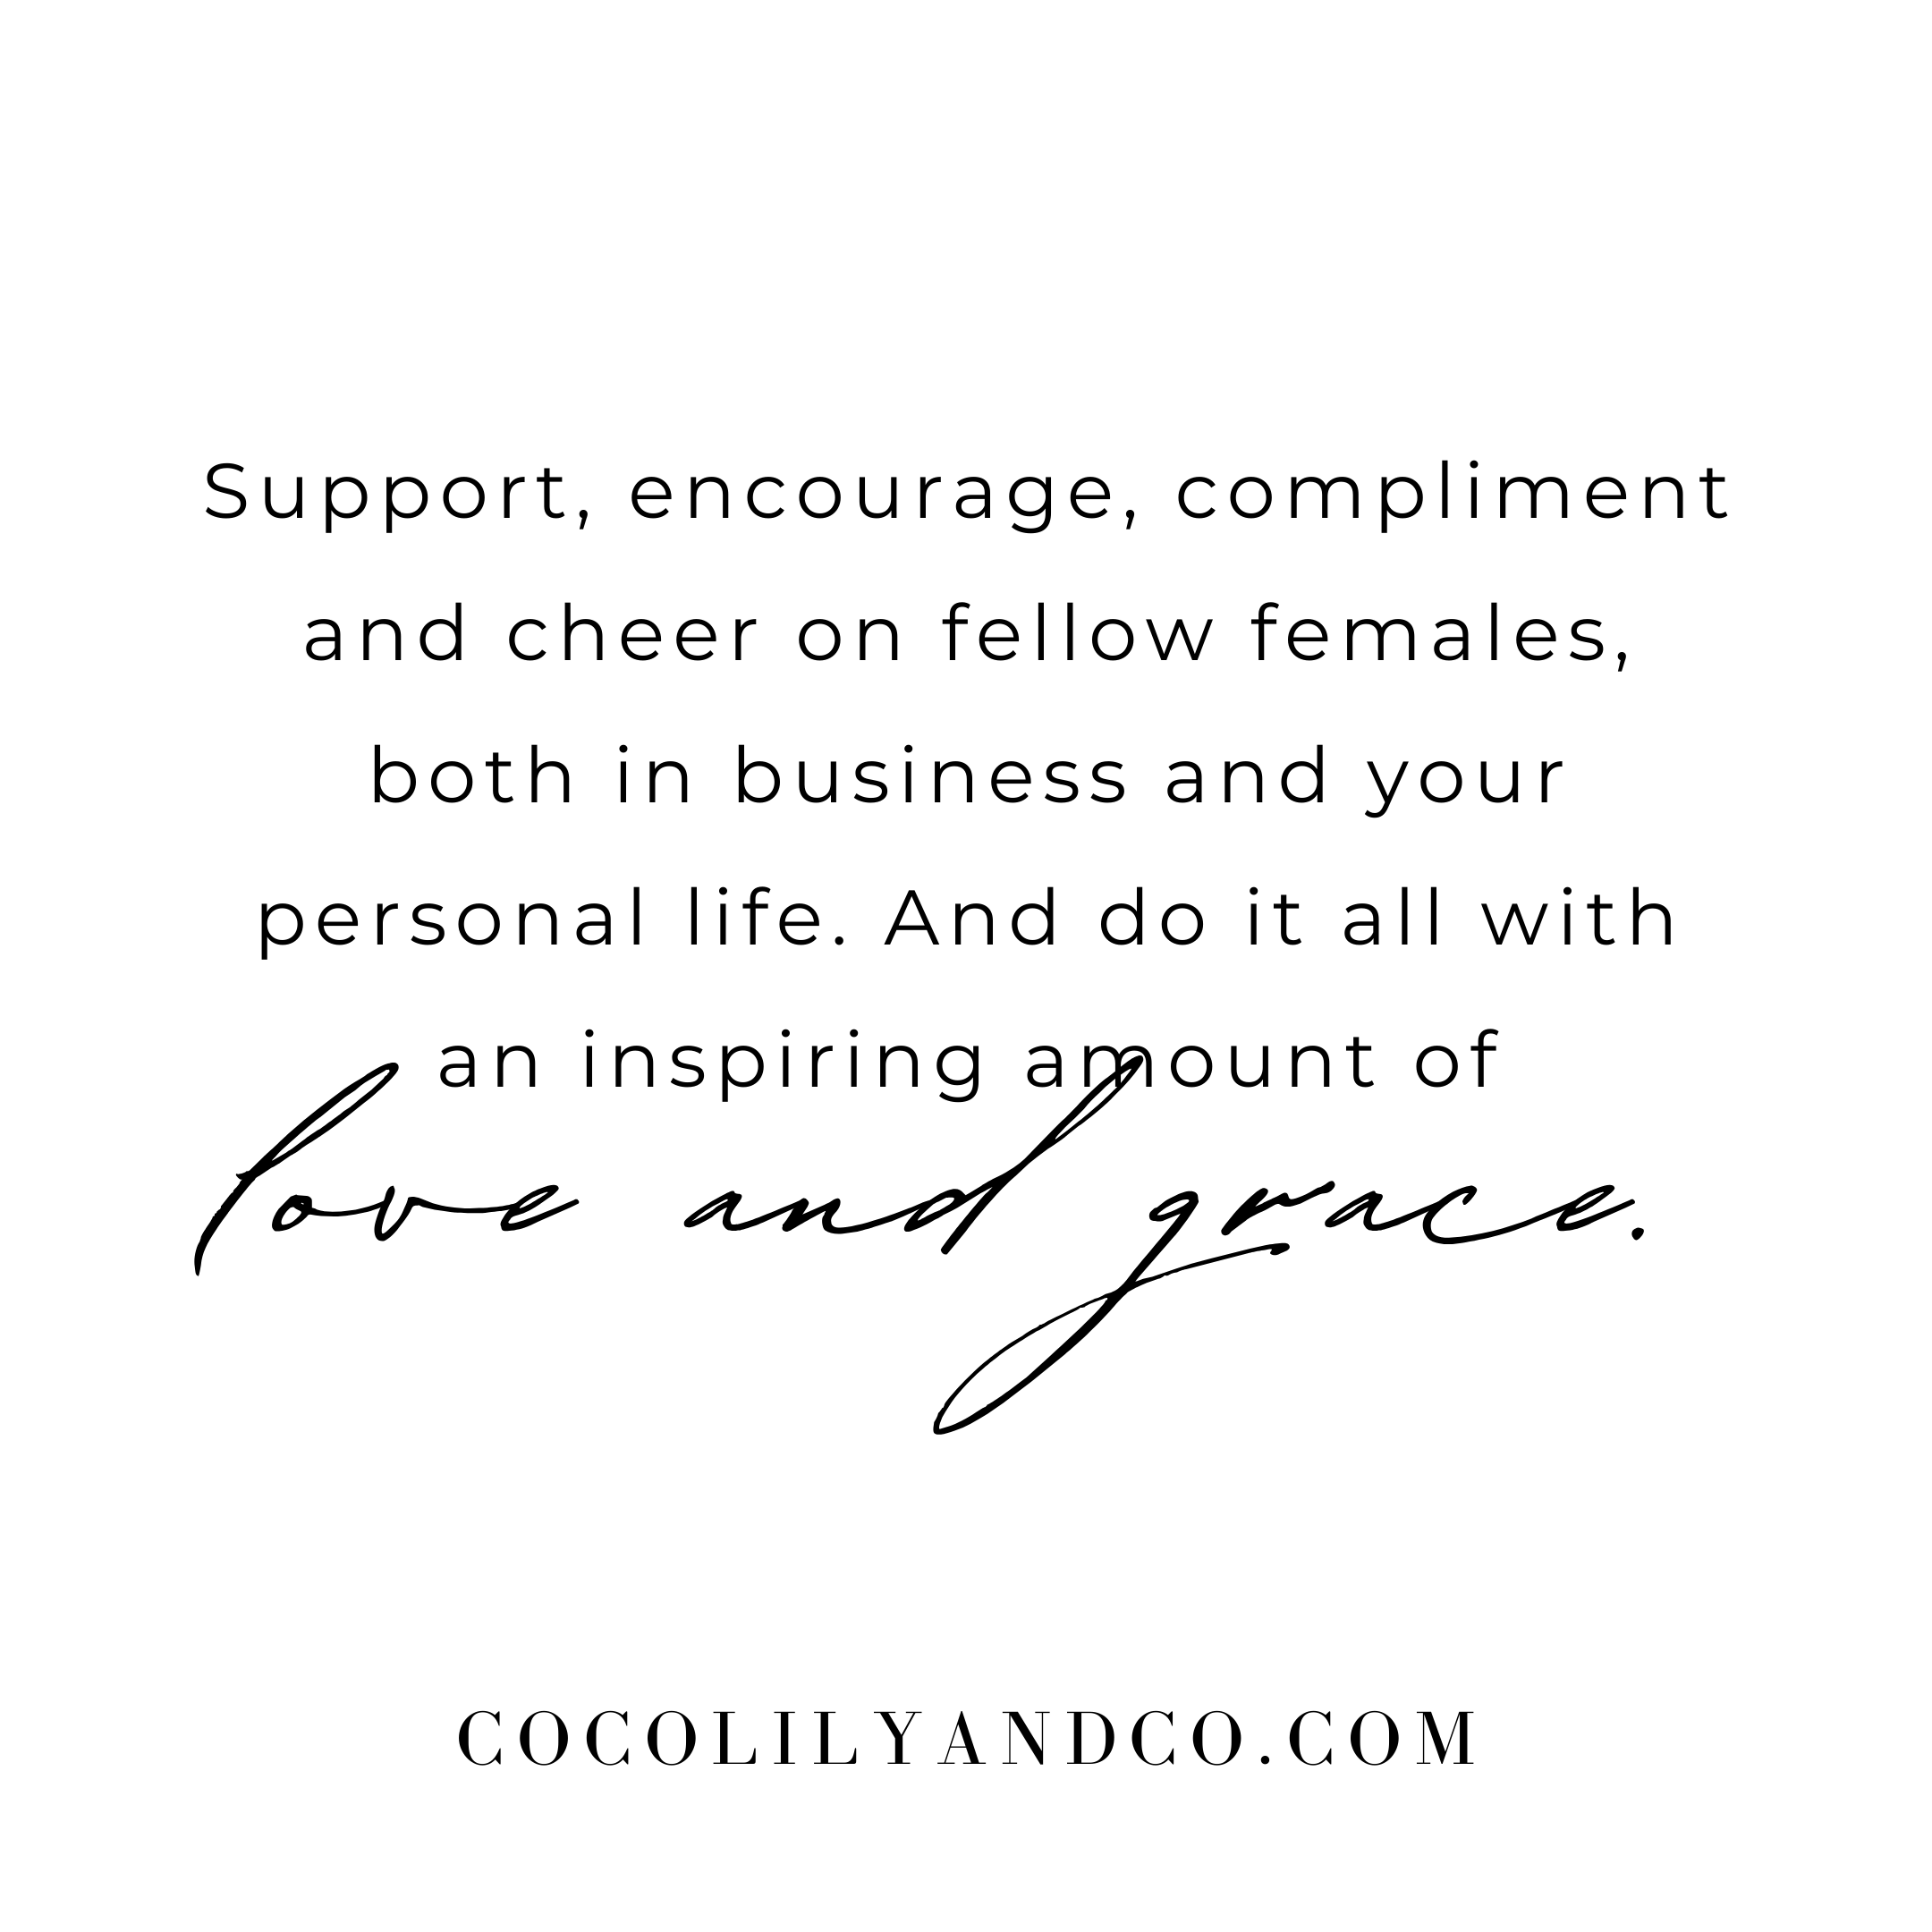 blog-womens day - quotes - inspirational - inspiration - female entrepreneurs - COCOLILYANDCO (4).png